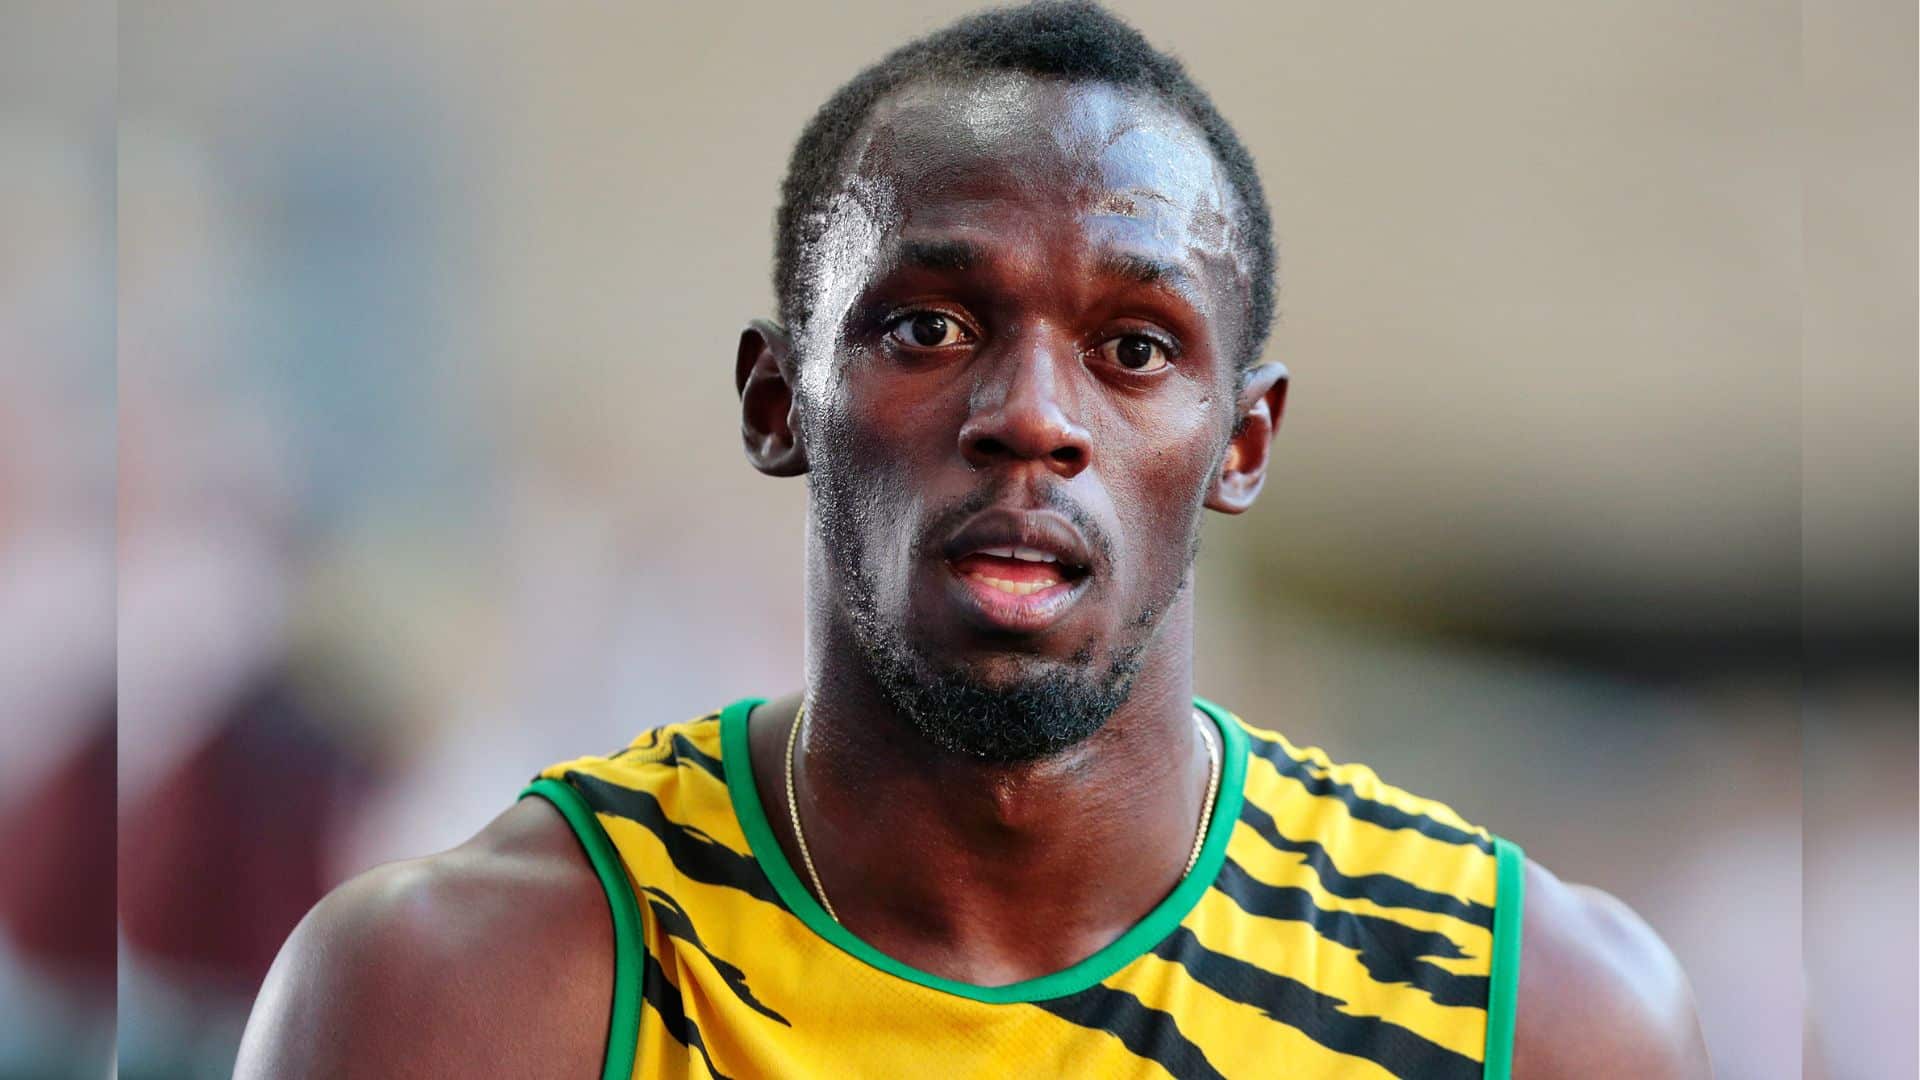 Usain Bolt Net Worth: Personal Life, Career, Family, And More